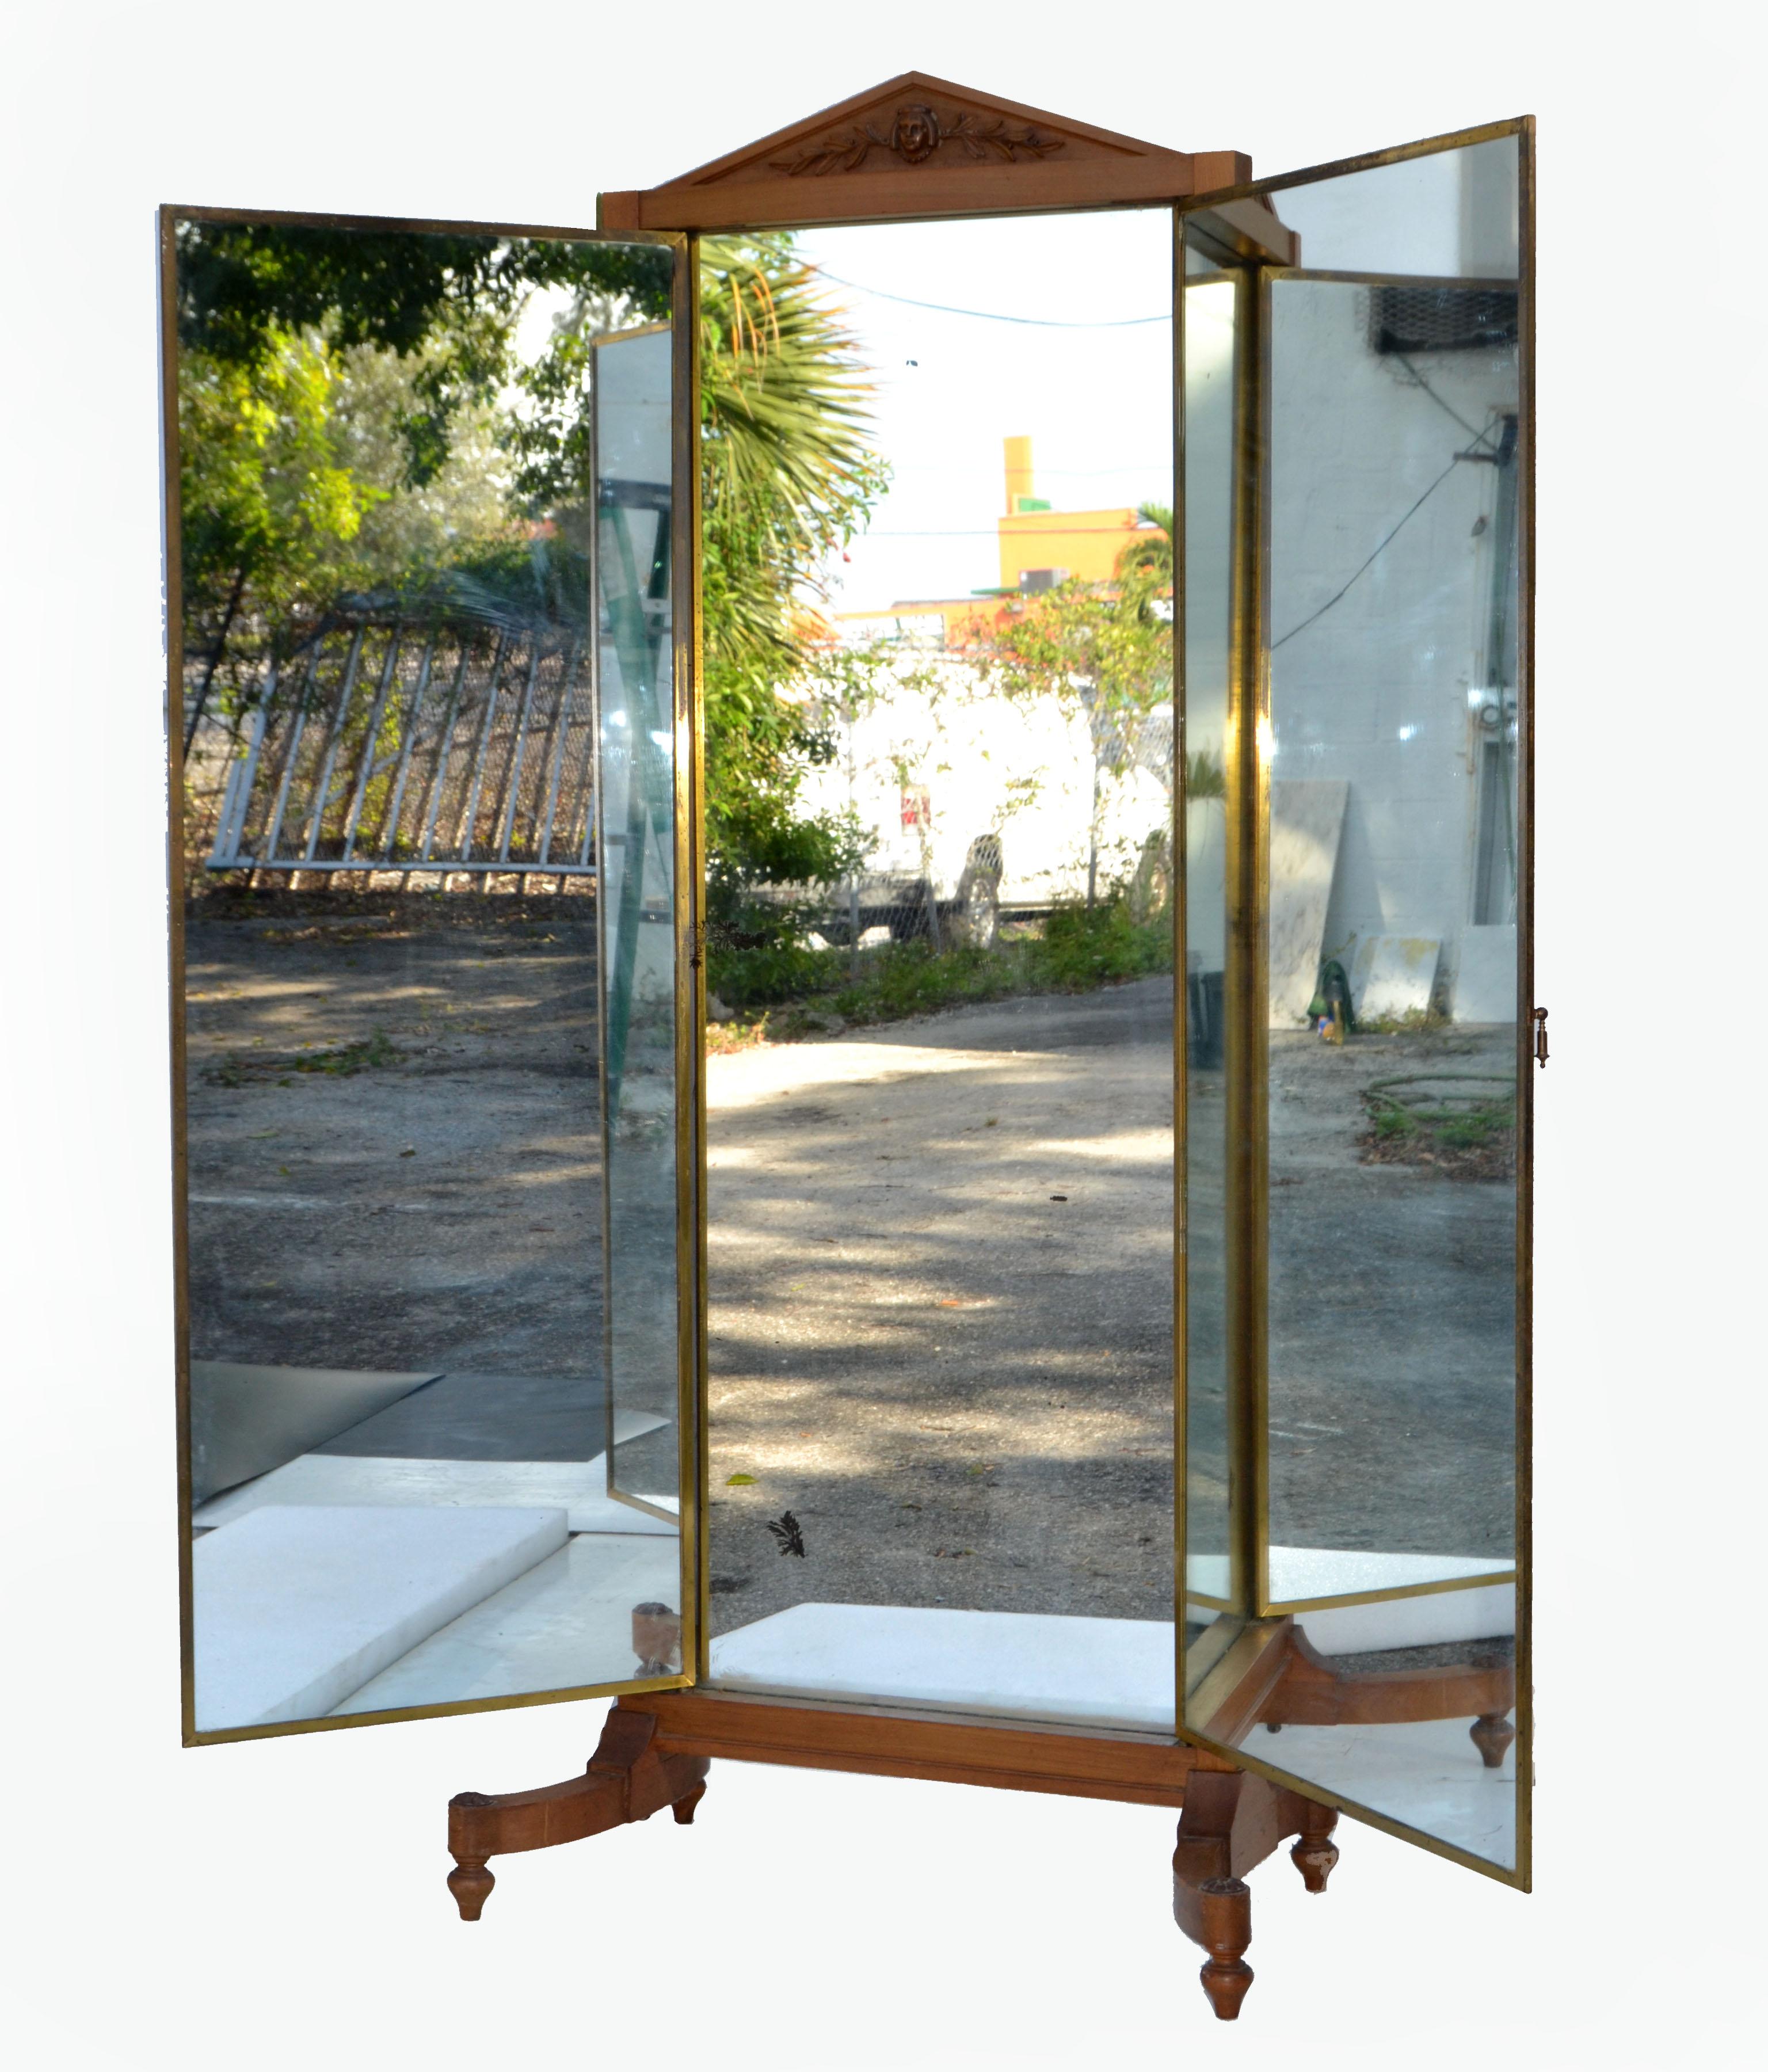 Art Nouveau hand carved walnut 3 panel store mirror by Miroir Brot from Paris, France.
Beautifully crafted in Walnut Wood and decorated with brass hardware.
The 3 parts can be opened individual.
Measurement open: 23.5 Depth x 50.5 inches width.